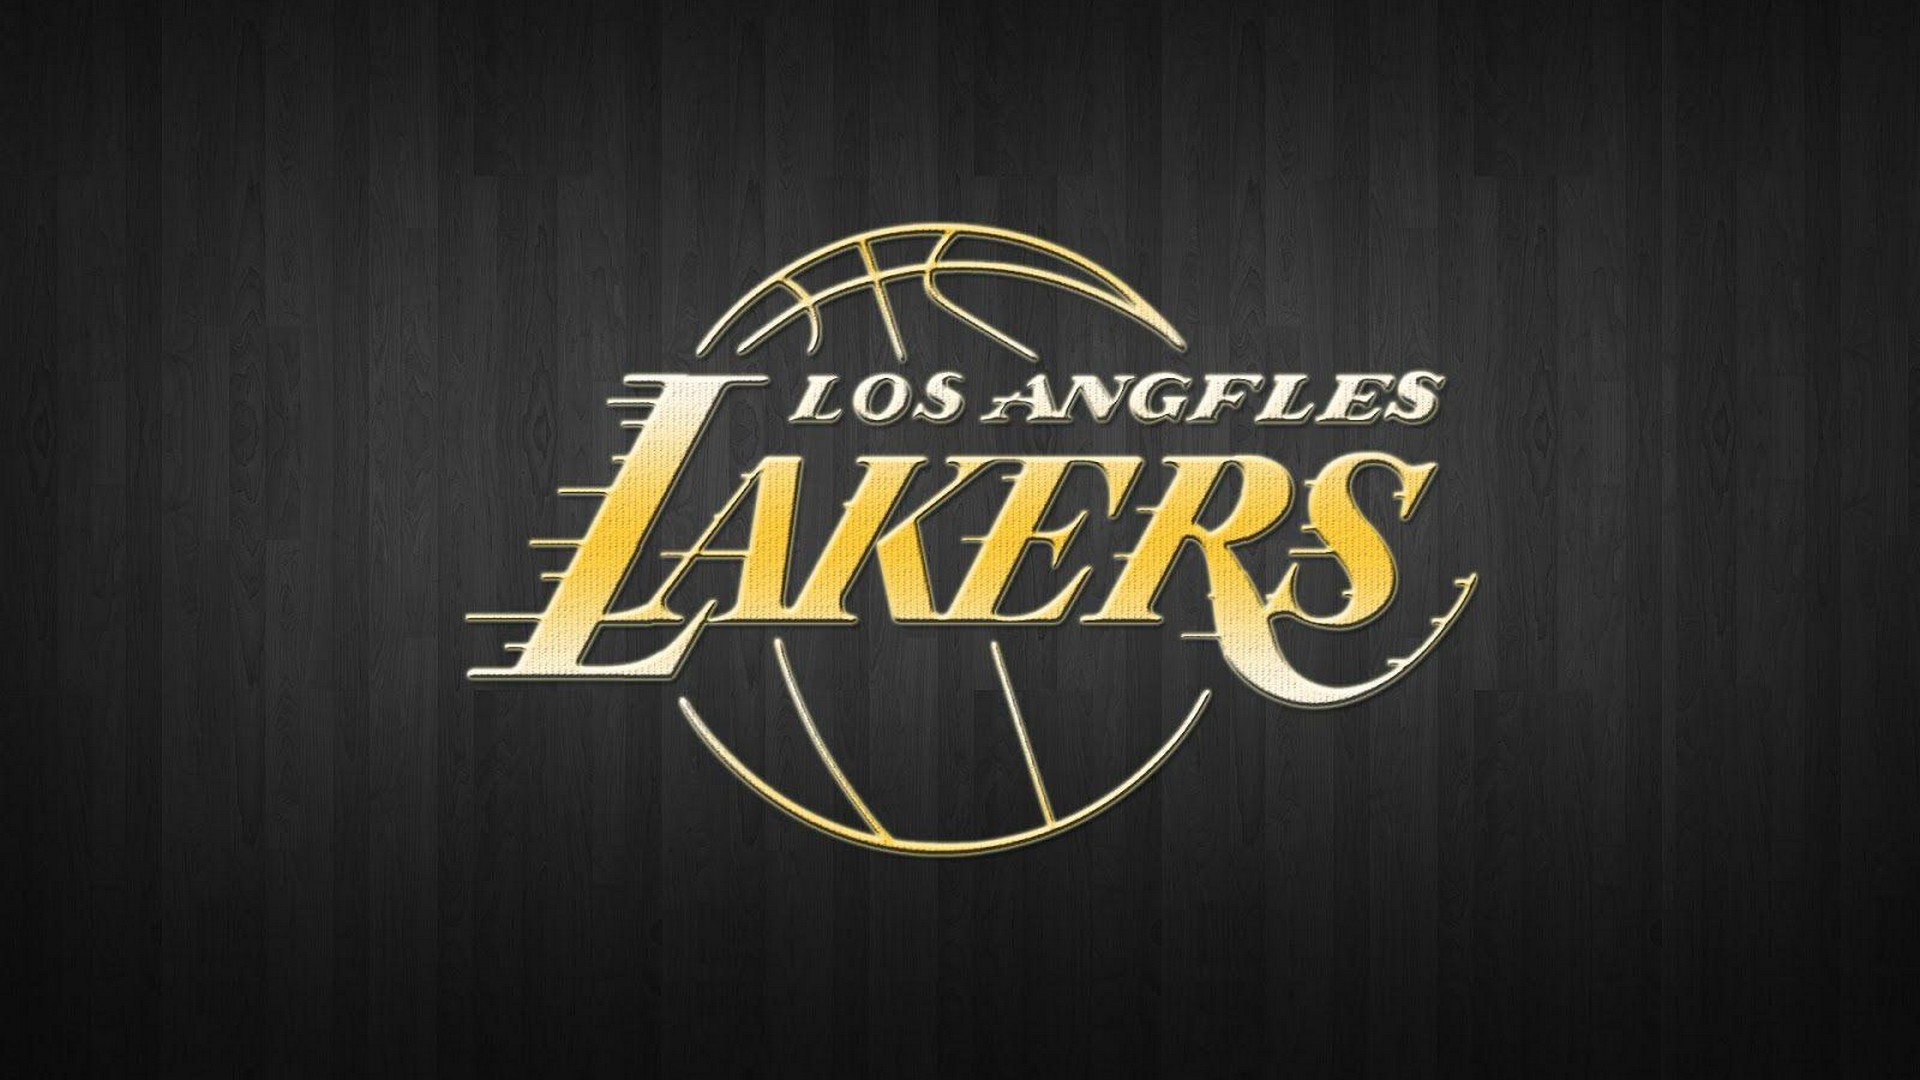 Wallpapers HD Los Angeles Lakers with image dimensions 1920X1080 pixel. You can make this wallpaper for your Desktop Computer Backgrounds, Windows or Mac Screensavers, iPhone Lock screen, Tablet or Android and another Mobile Phone device